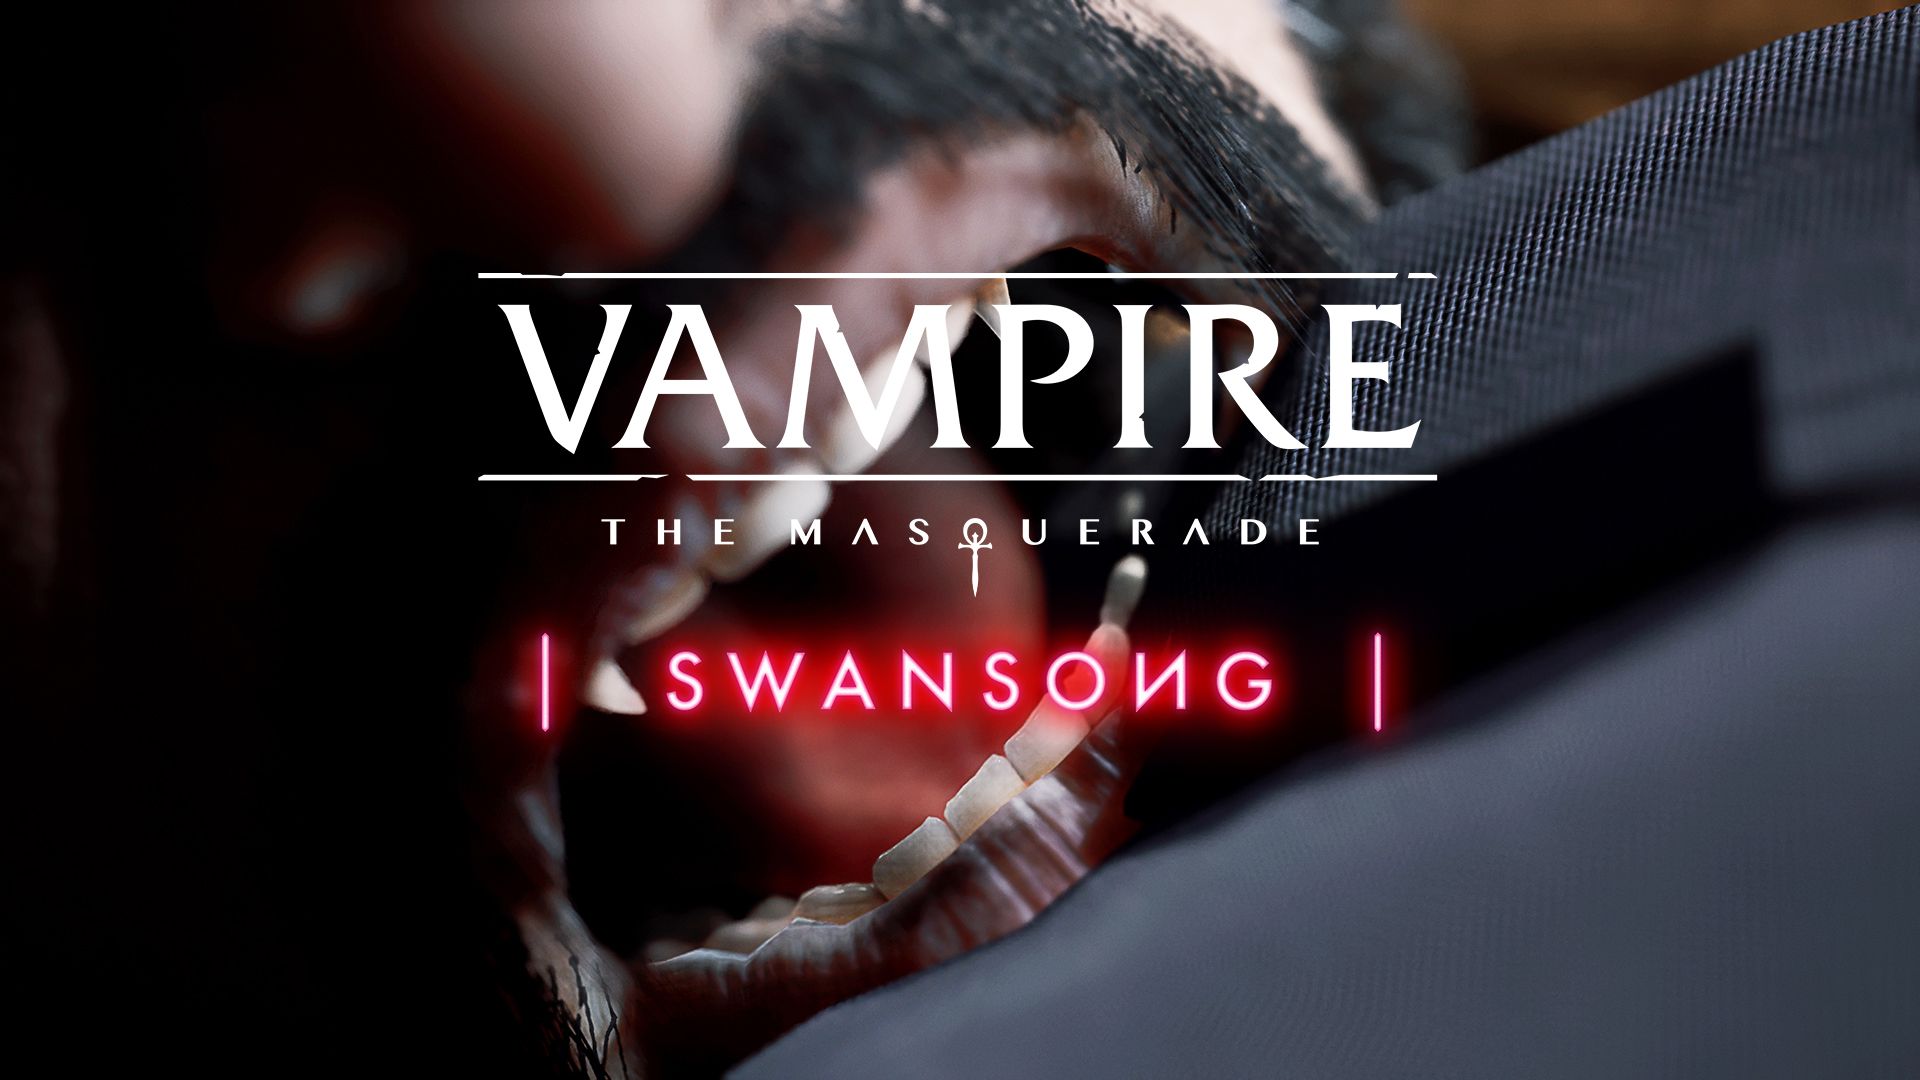 instal the last version for ipod Vampire: The Masquerade – Swansong